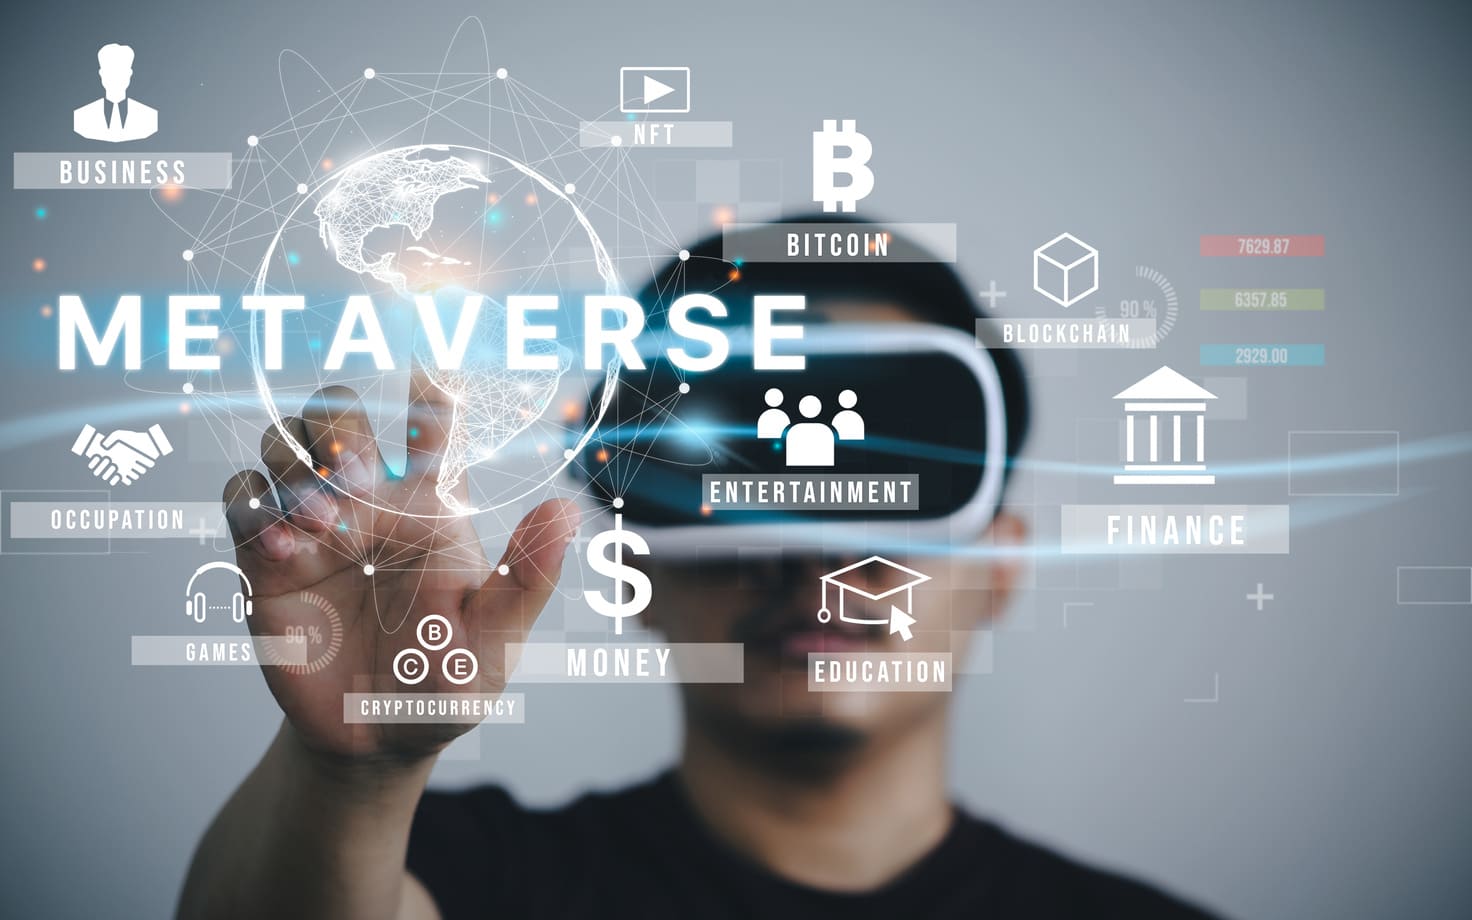 Metaverse Economy to grow between $8-13 trillion by 2030